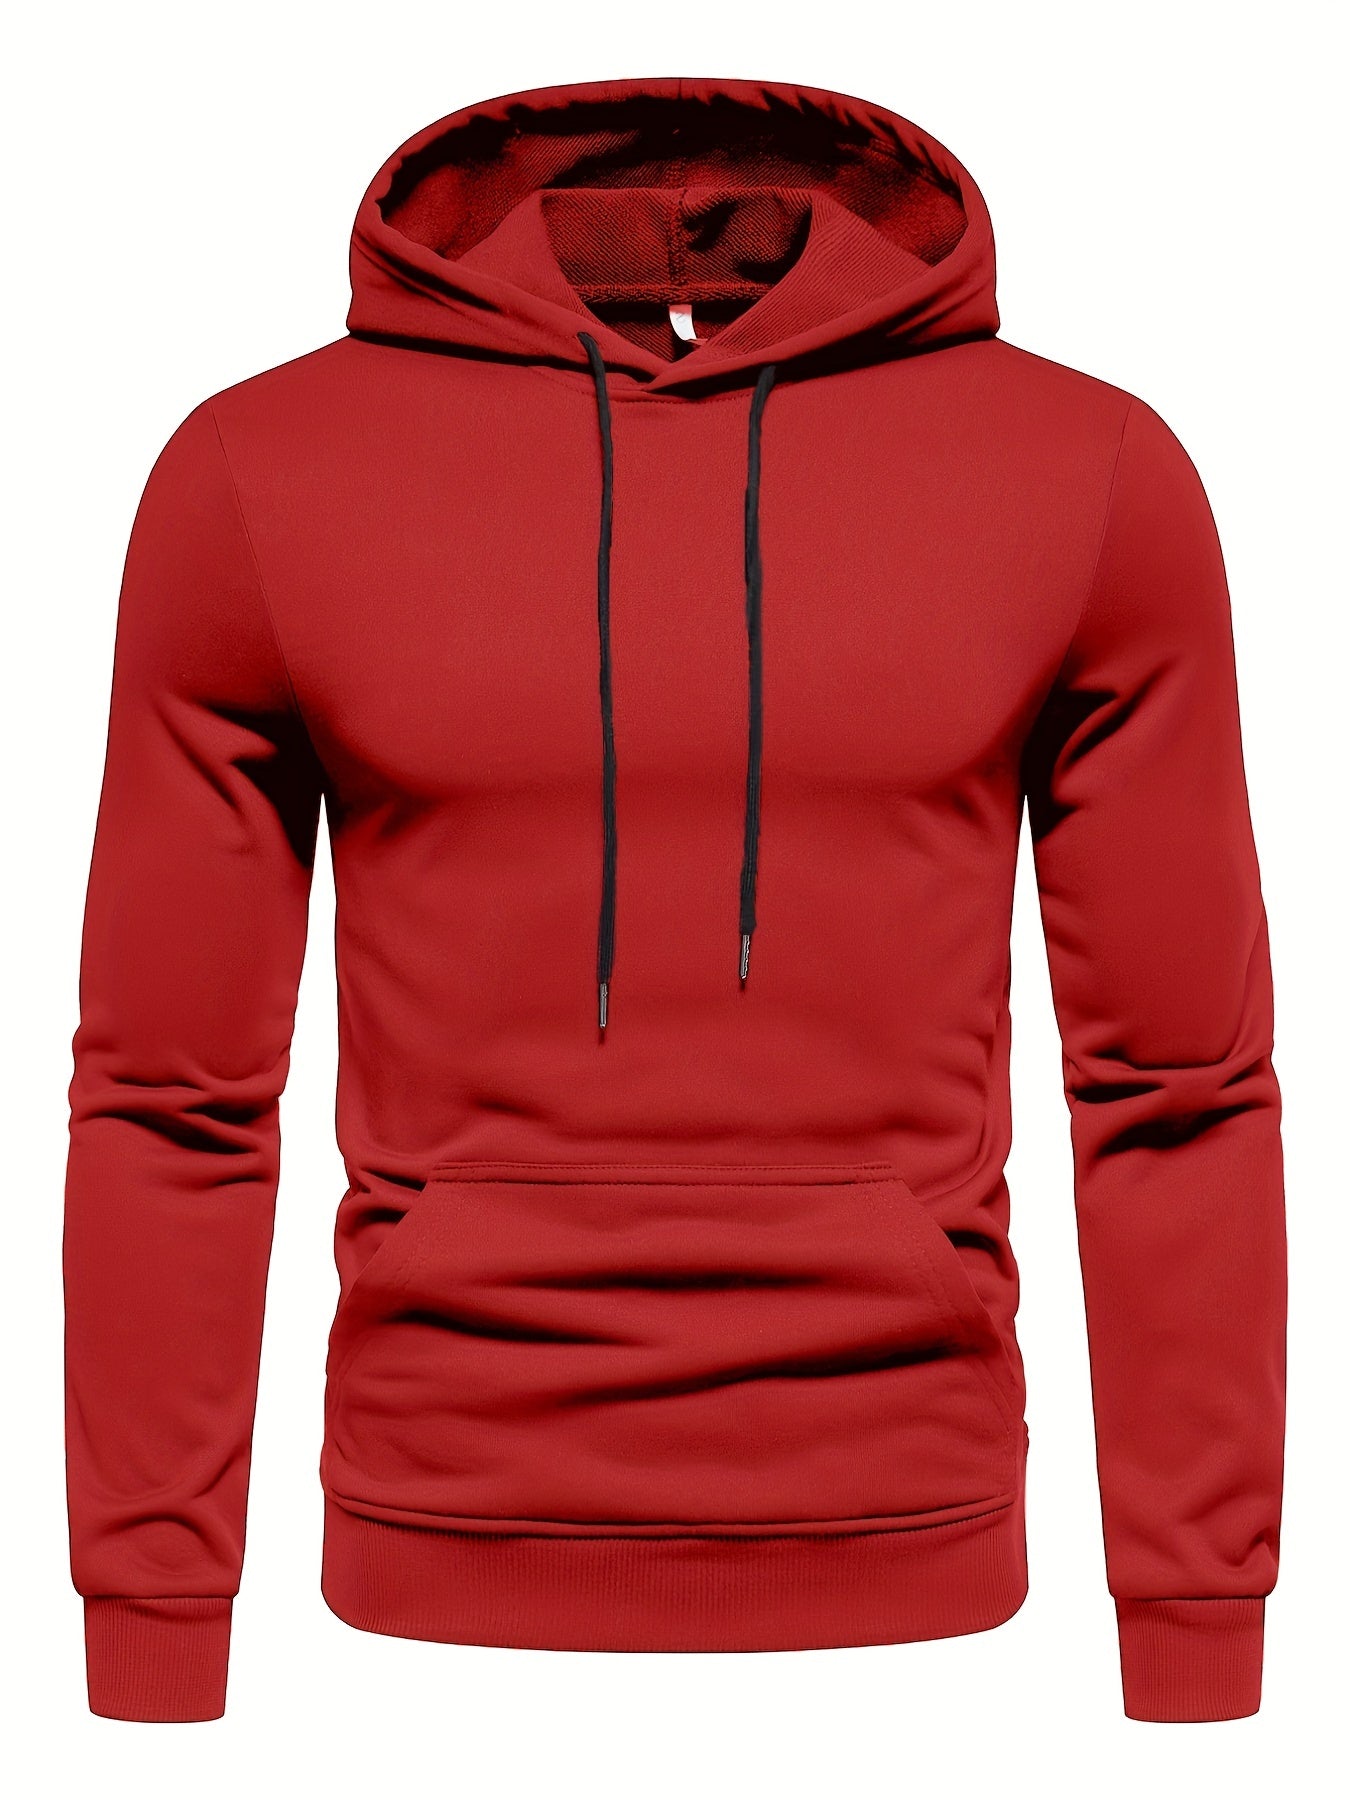 Men's Long Sleeve Solid Hoodies Street Casual Sports And Fashionable With Kangaroo Pocket Sweatshirt,Suitable For Outdoor Sports,For Autumn And Winter, Fashionable And Versatile